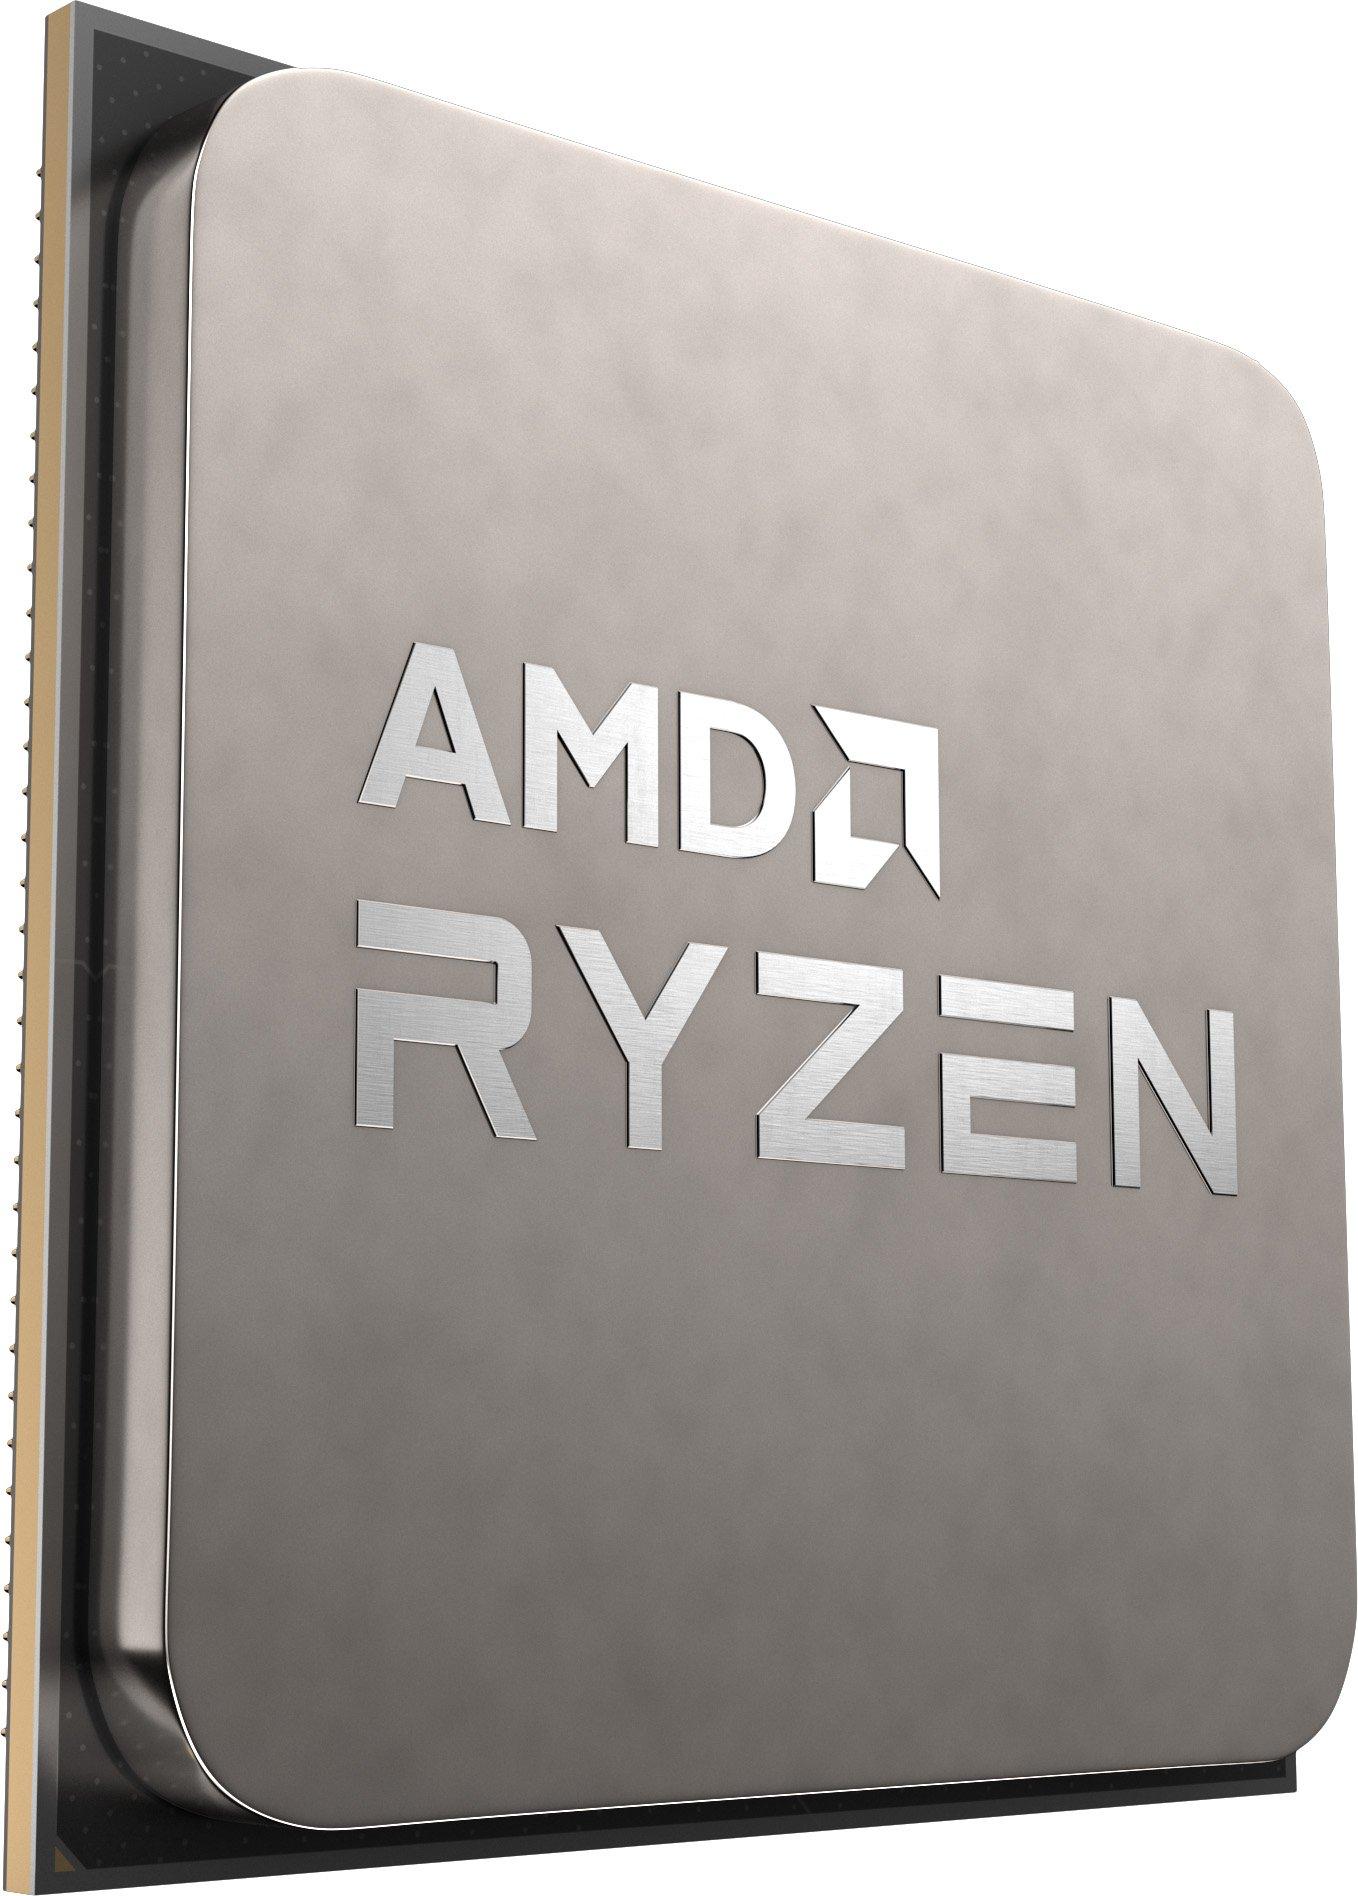 AMD Ryzen 7 5700X3D Brings More Value To AM4 Gamers With 8 Cores, 100 MB  Cache, & Up To 13% Faster Than 13600K At $249